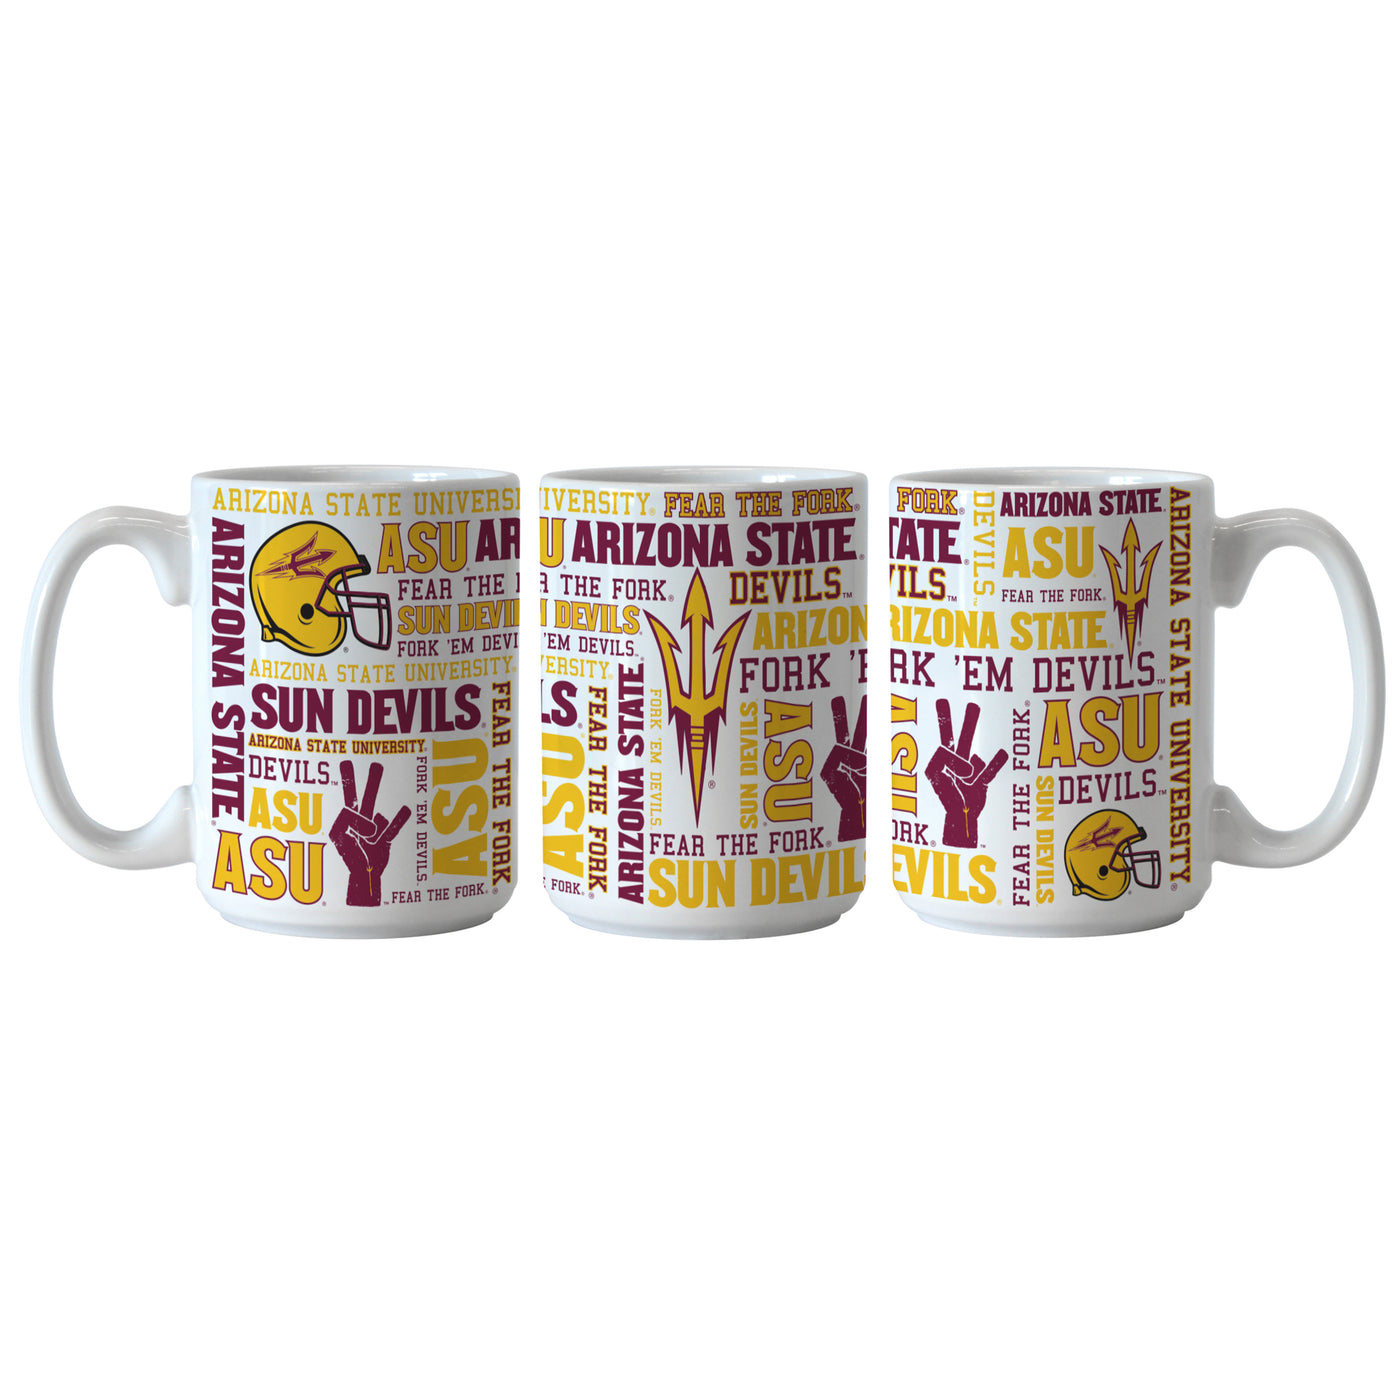 3 ASU white mugs with multiple retro and classic designs covering the mug